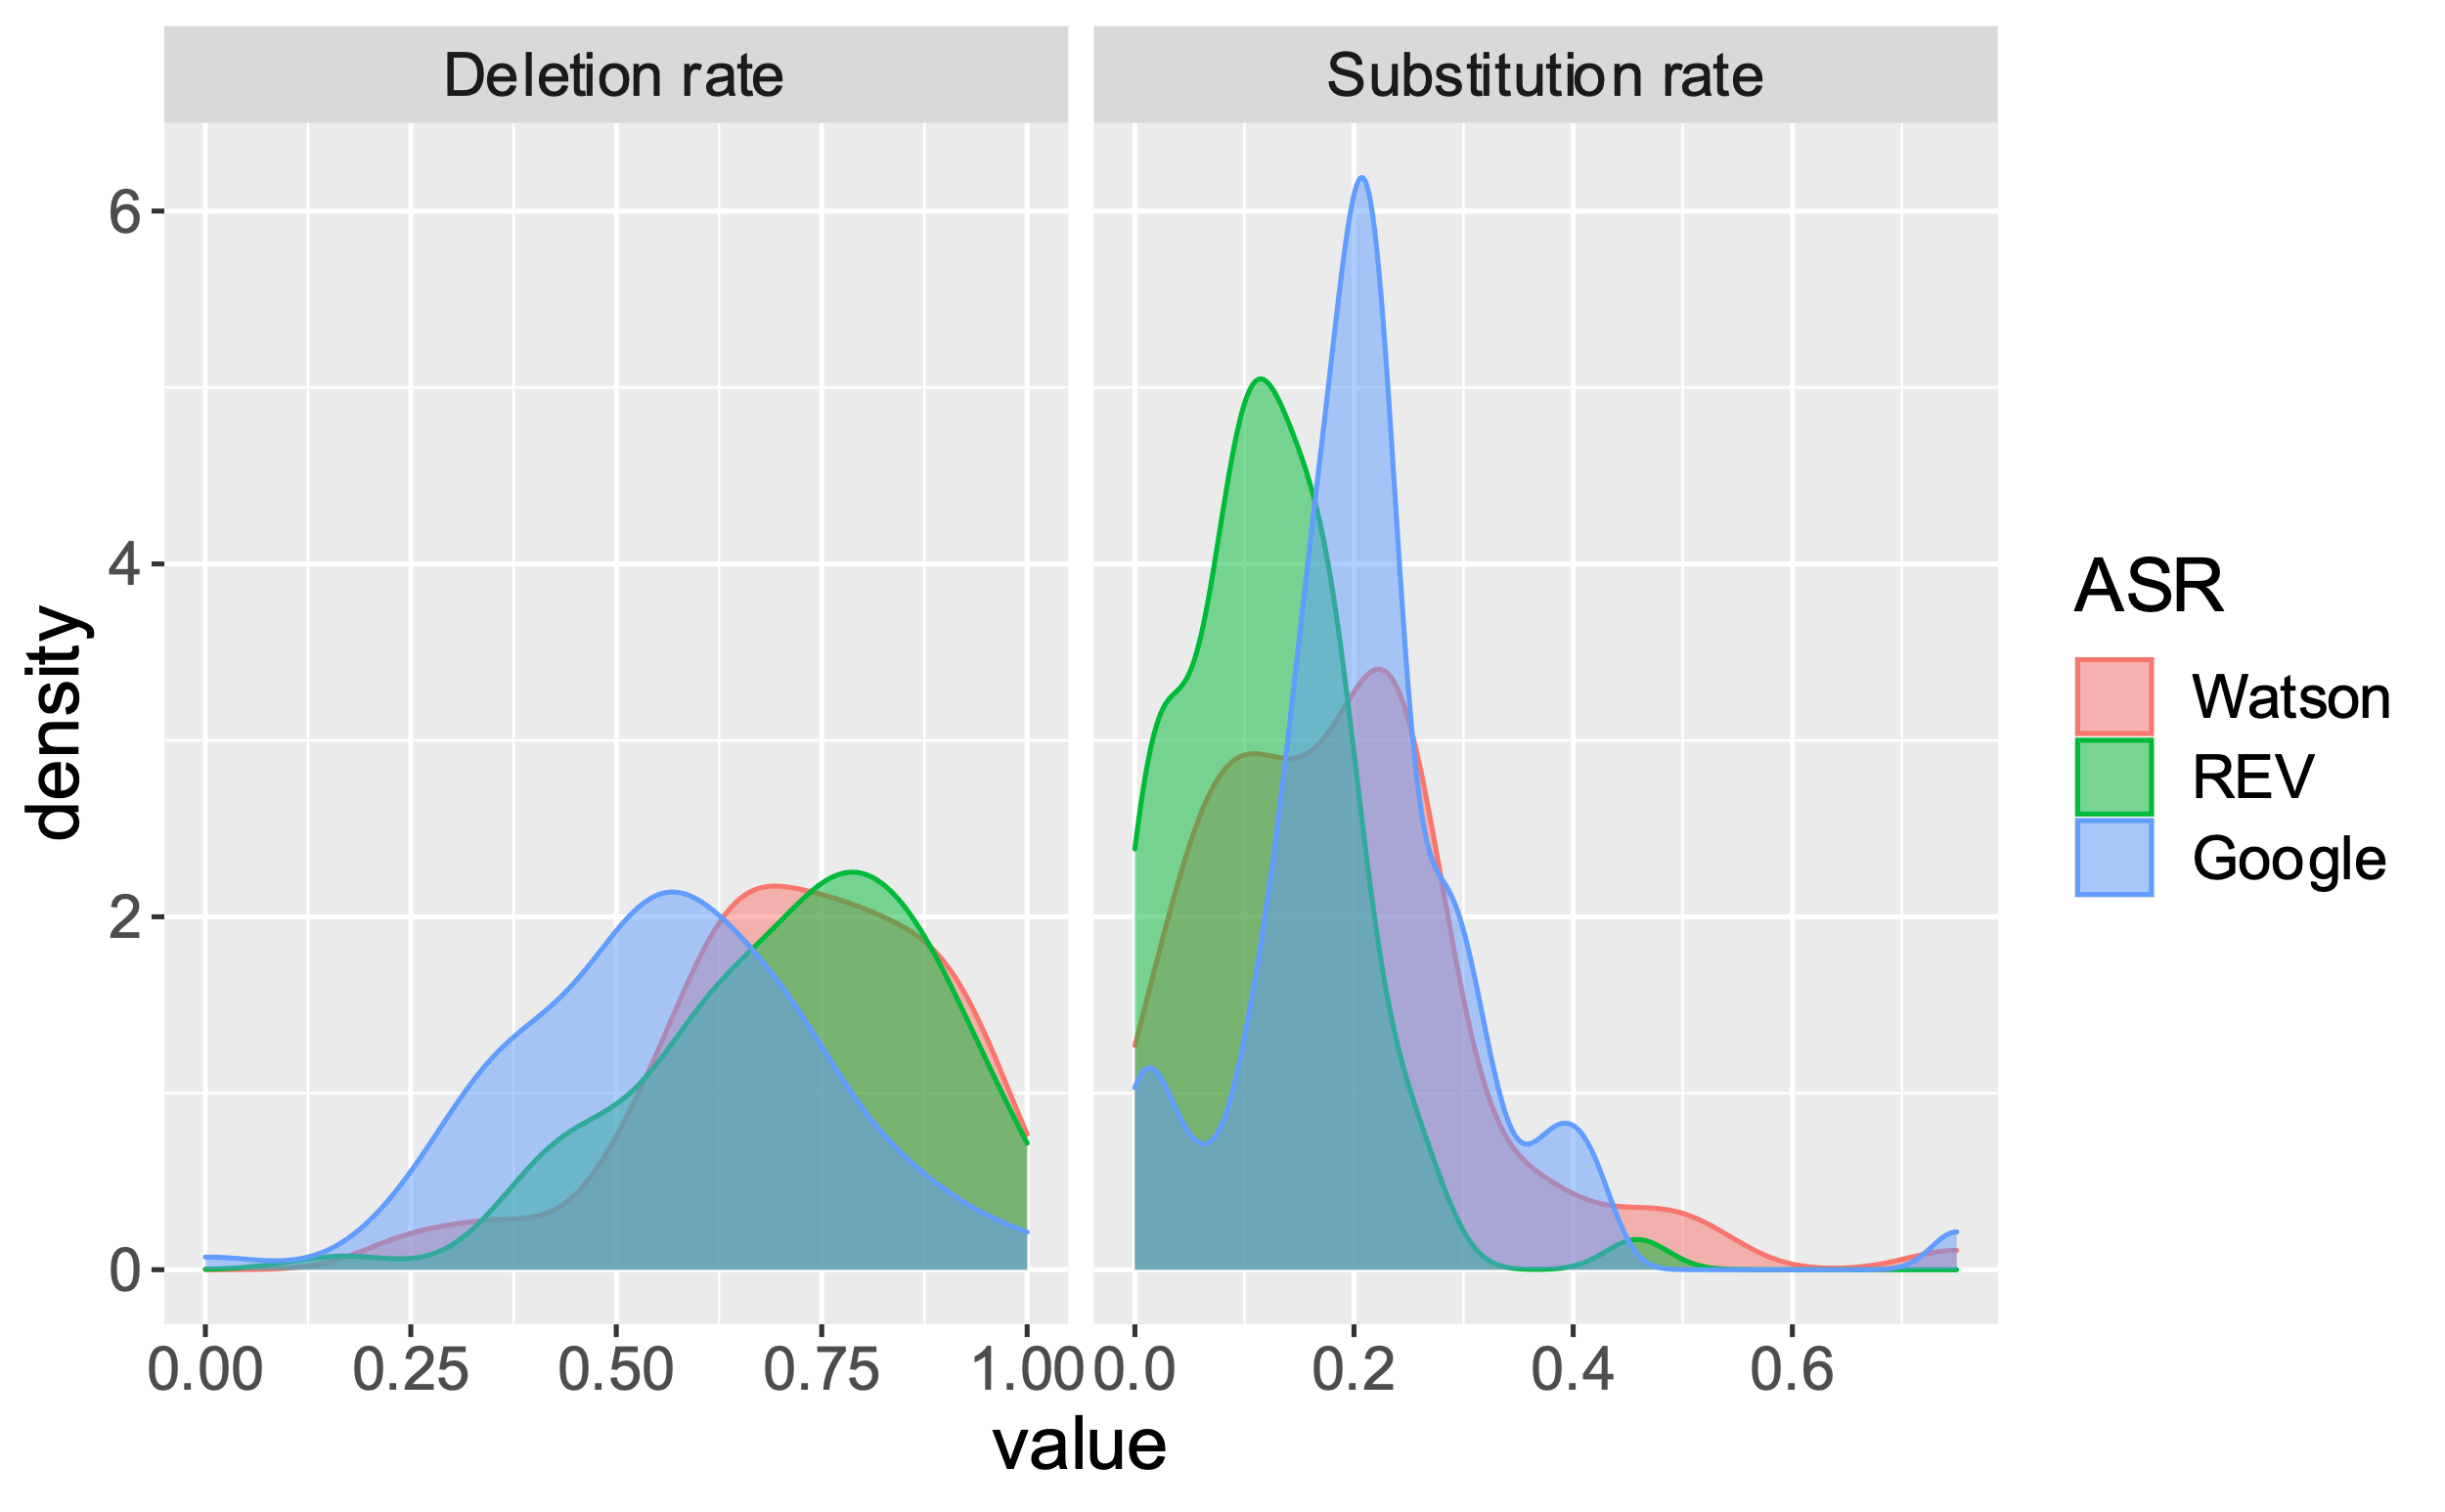 Density plots of deletion and substitution errors by ASR